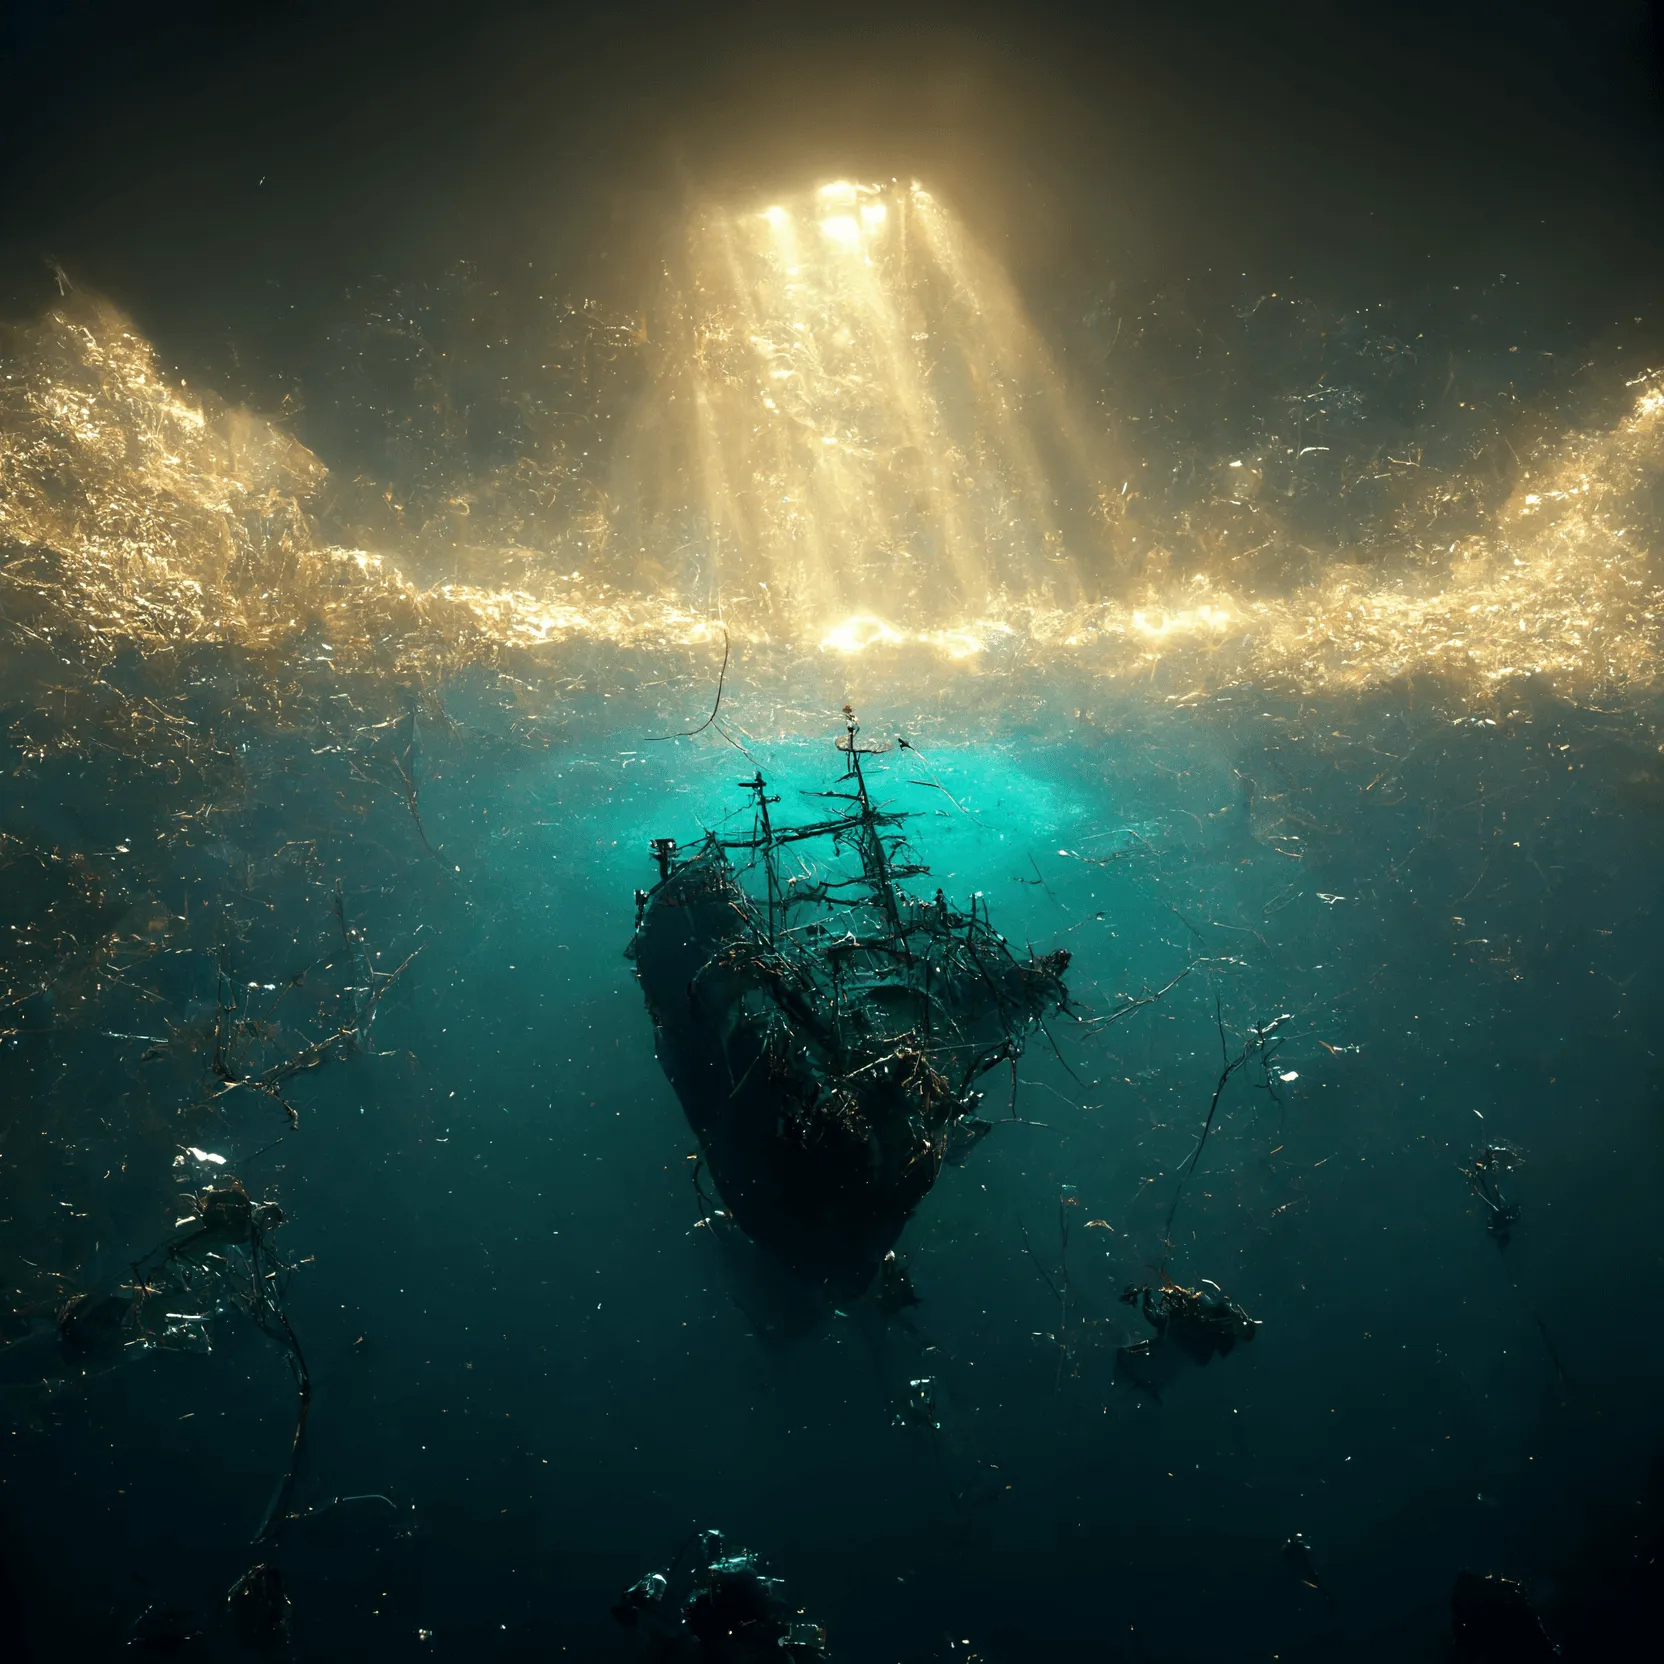 the ship is sinking deep into the depths of the sea - New World Lore